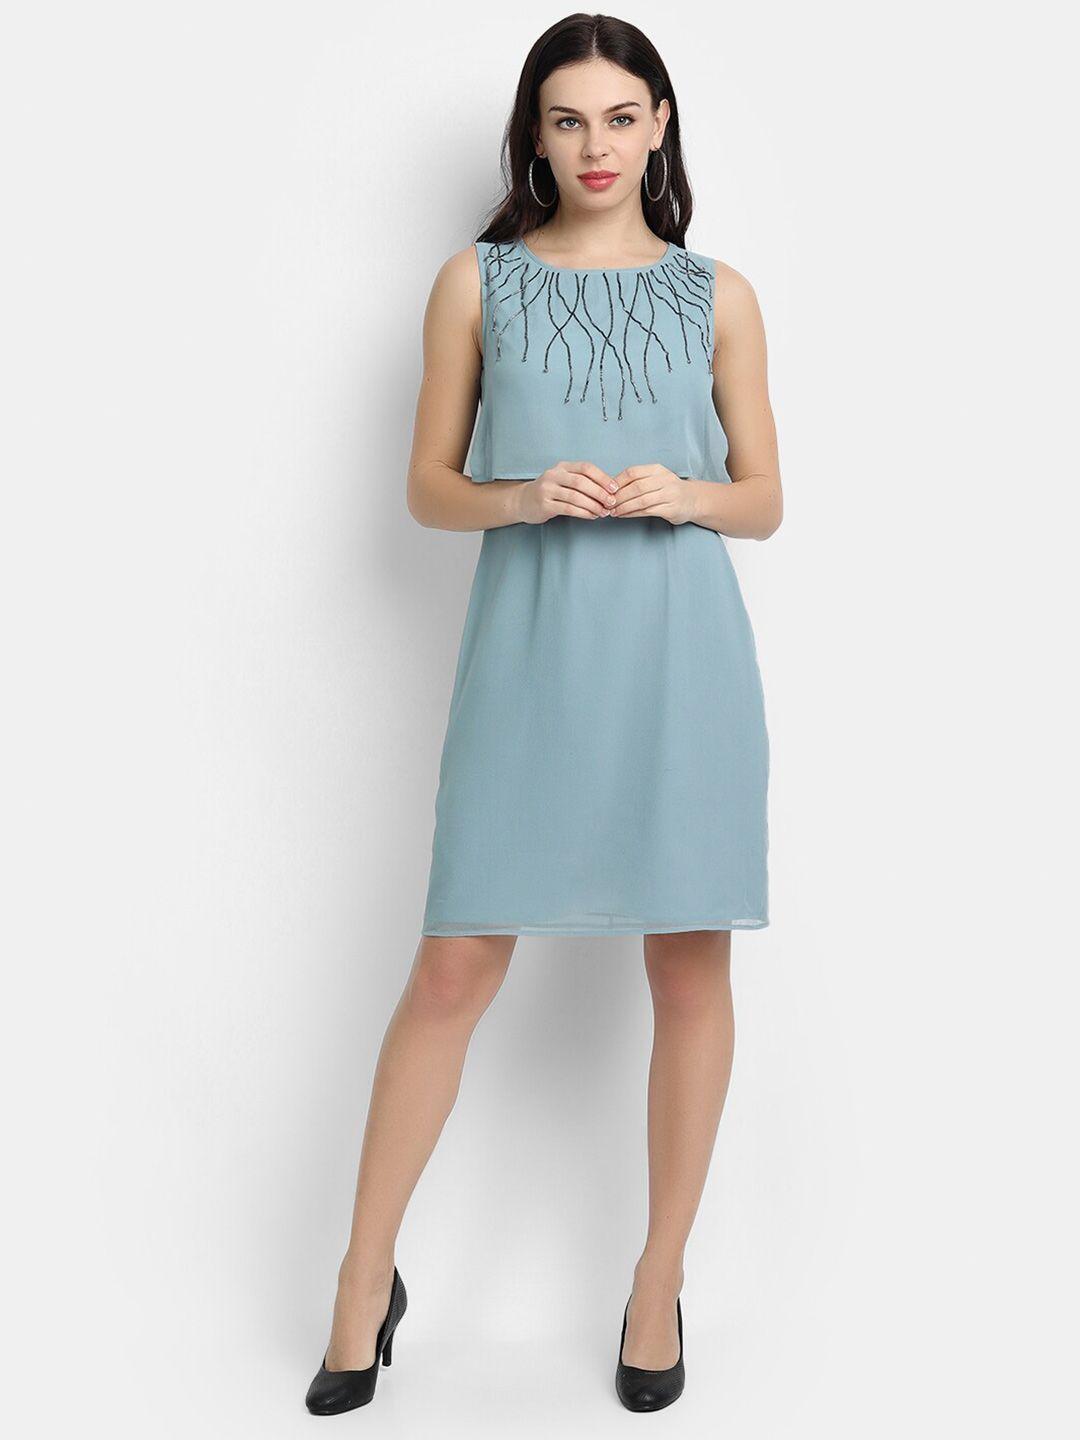 ly2 turquoise blue georgette dress